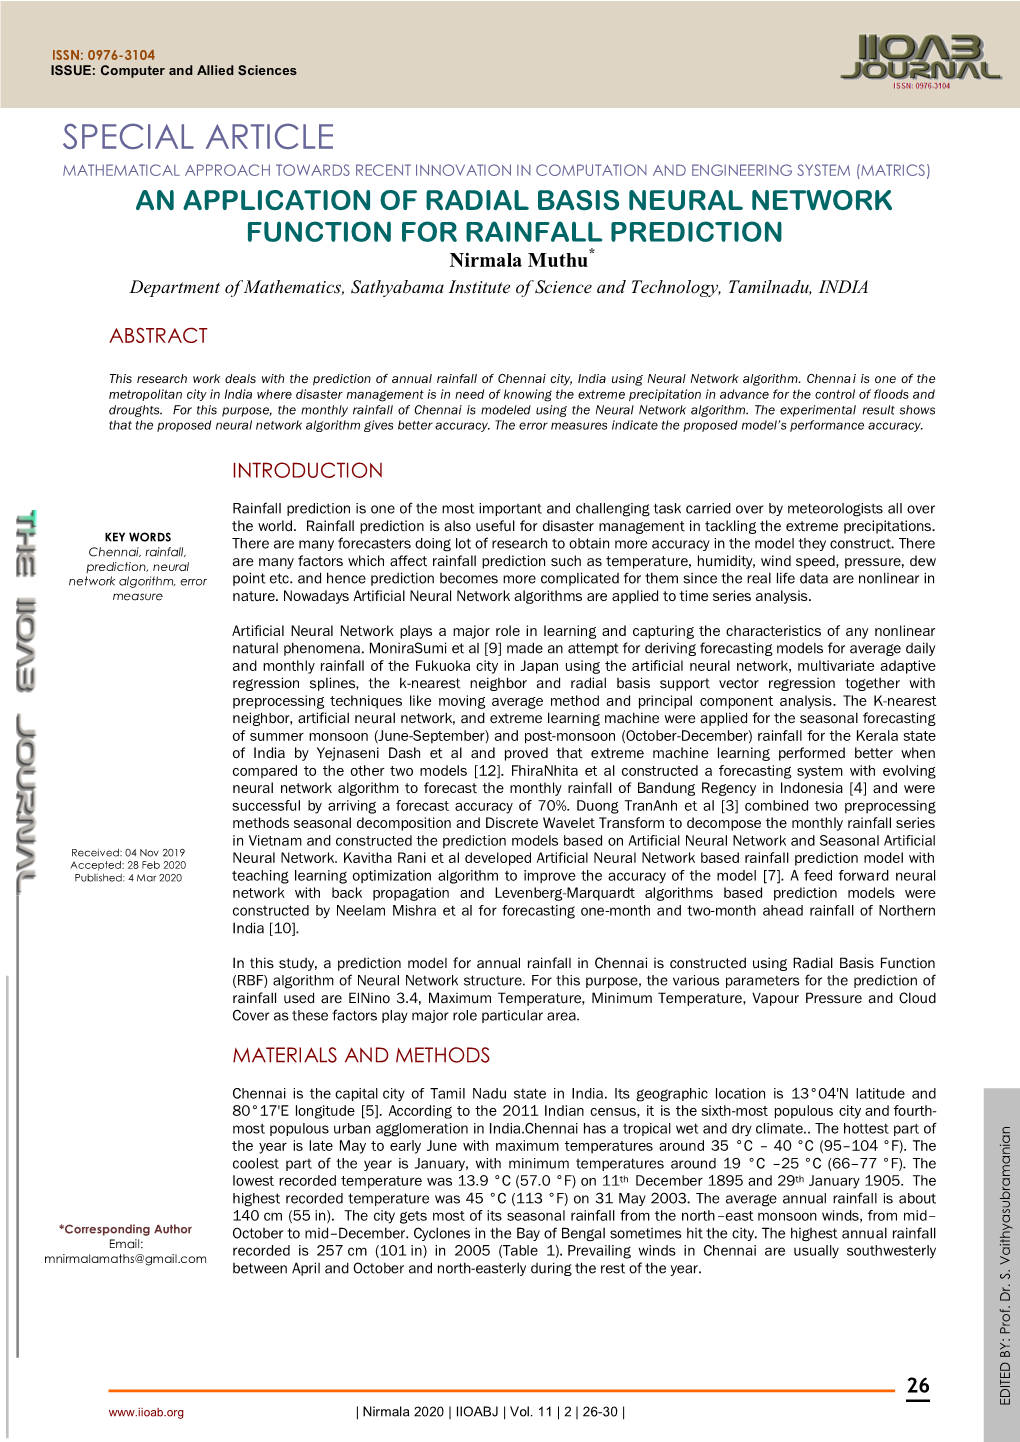 An Application of Radial Basis Neural Network Function for Rainfall Prediction